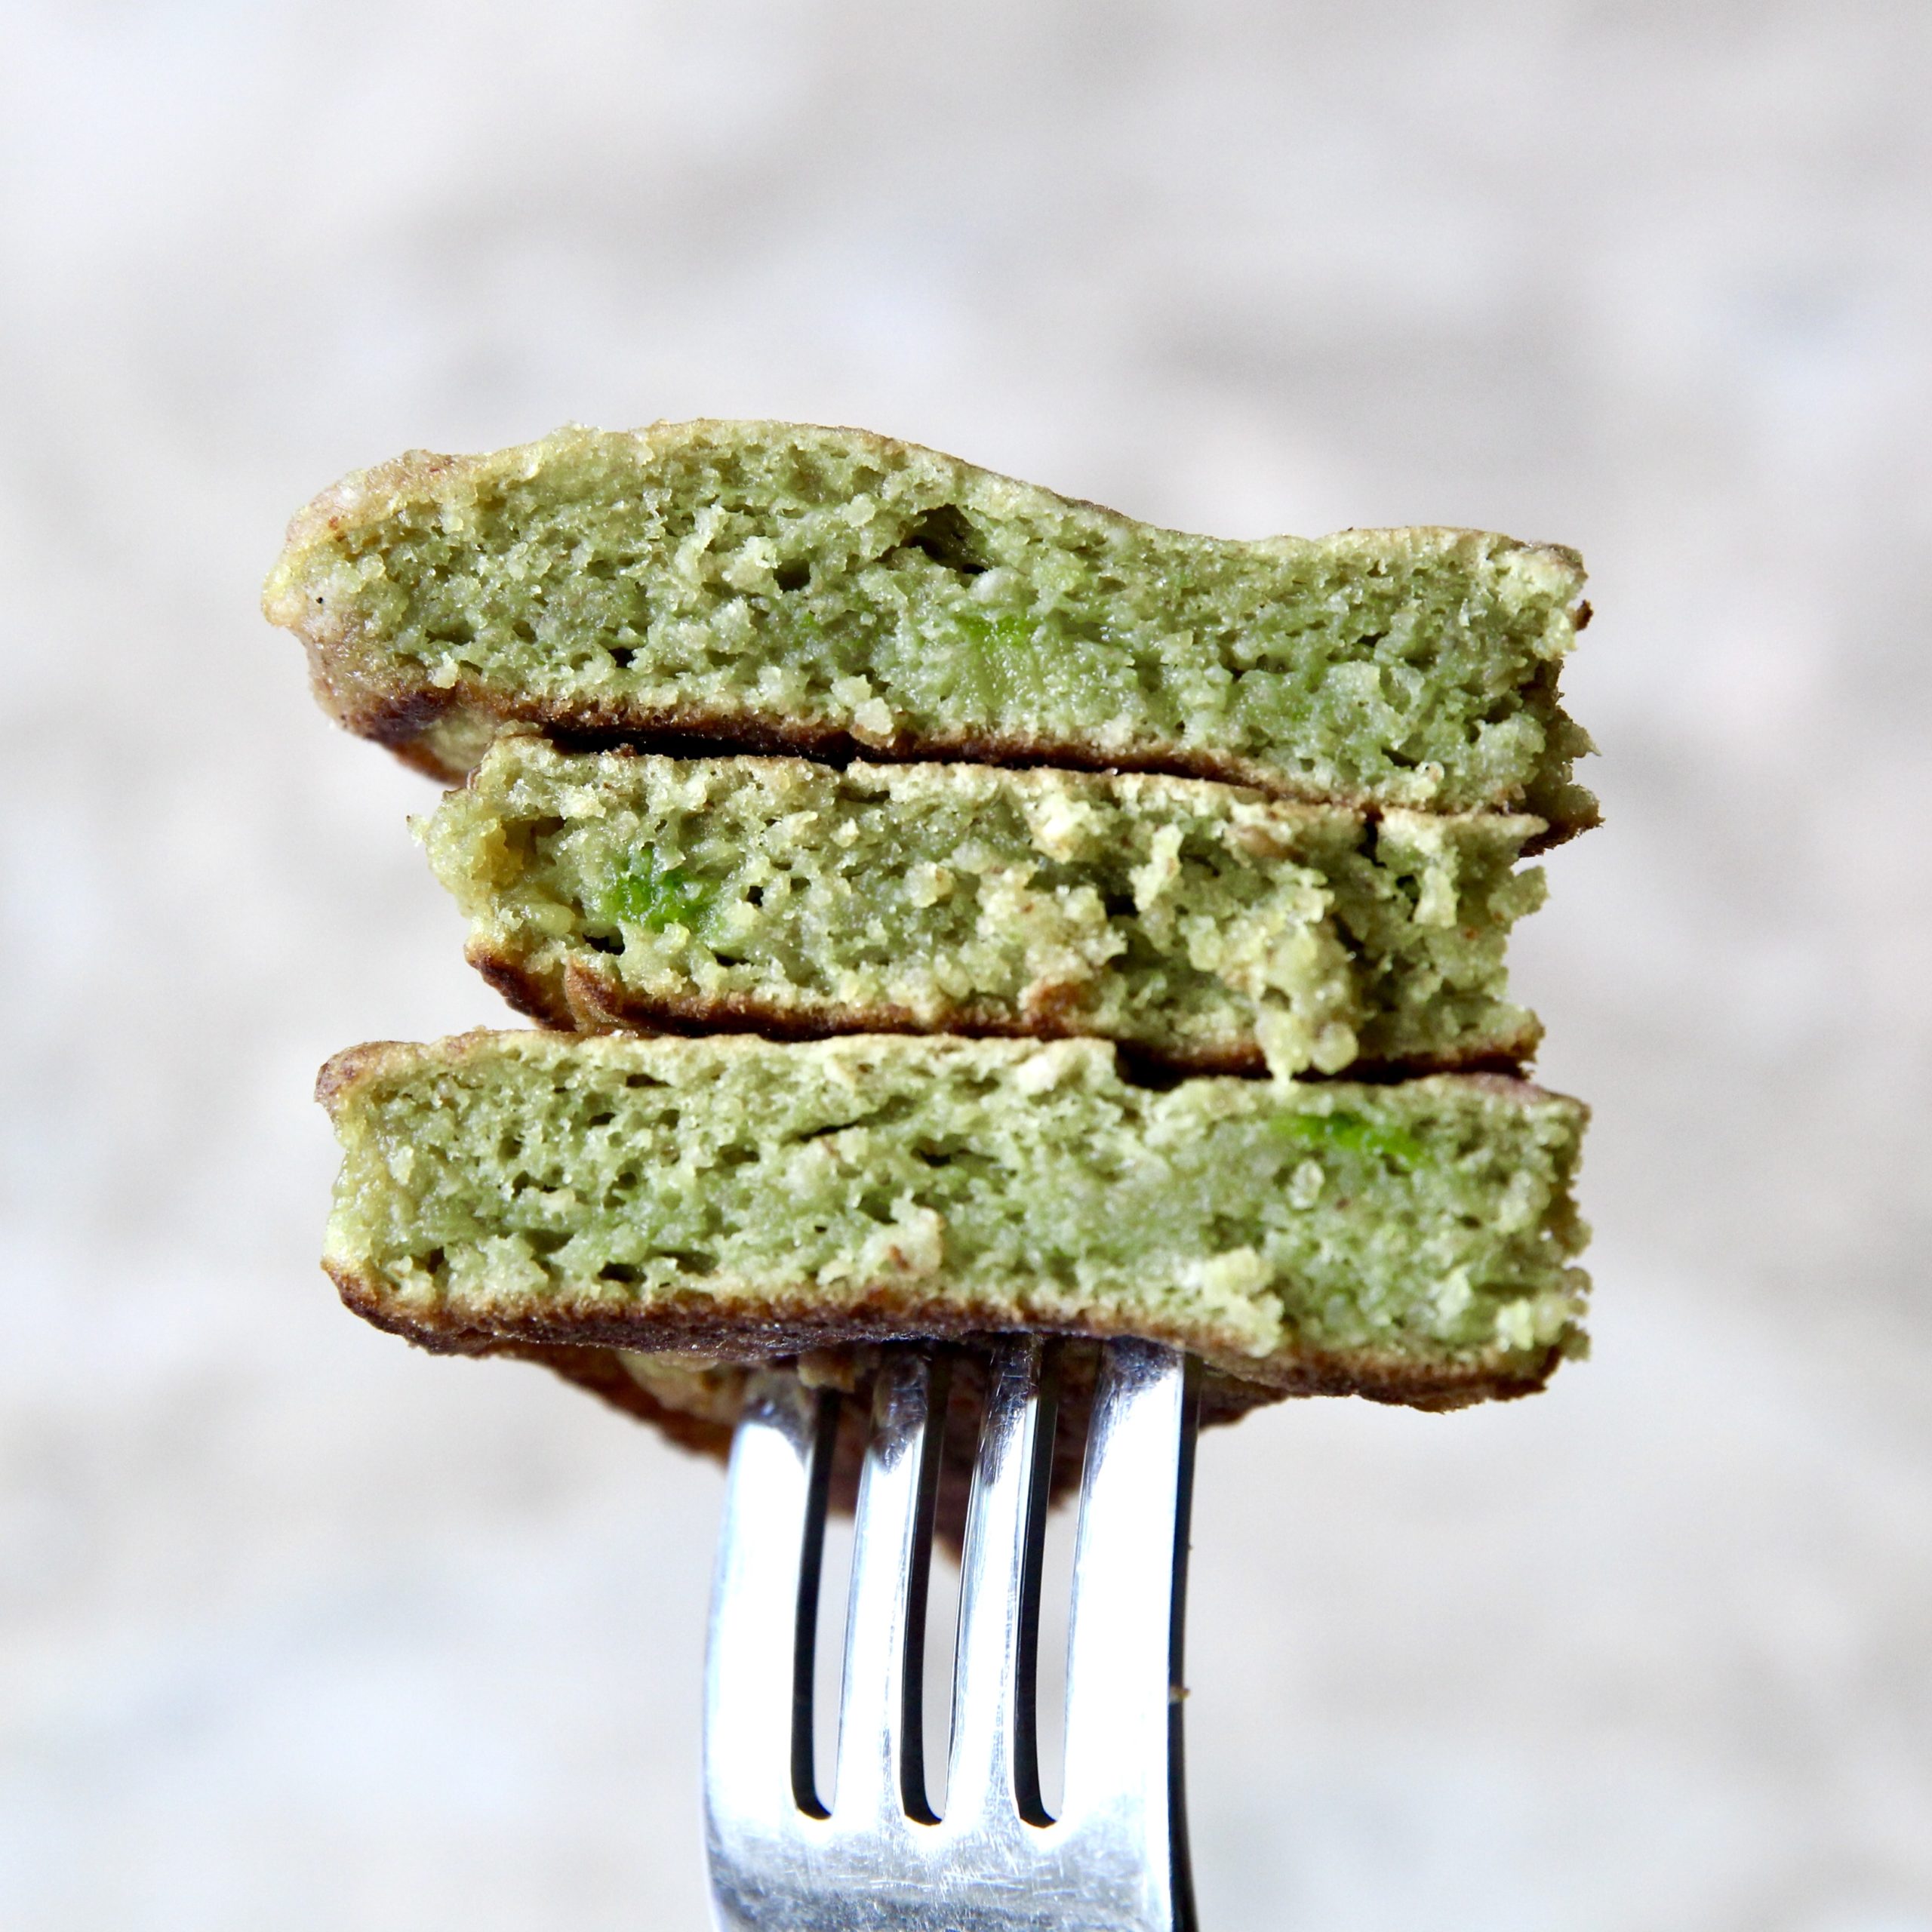 Blender Avocado Pancakes (Made Under 10 minutes) - almond butter oatmeal